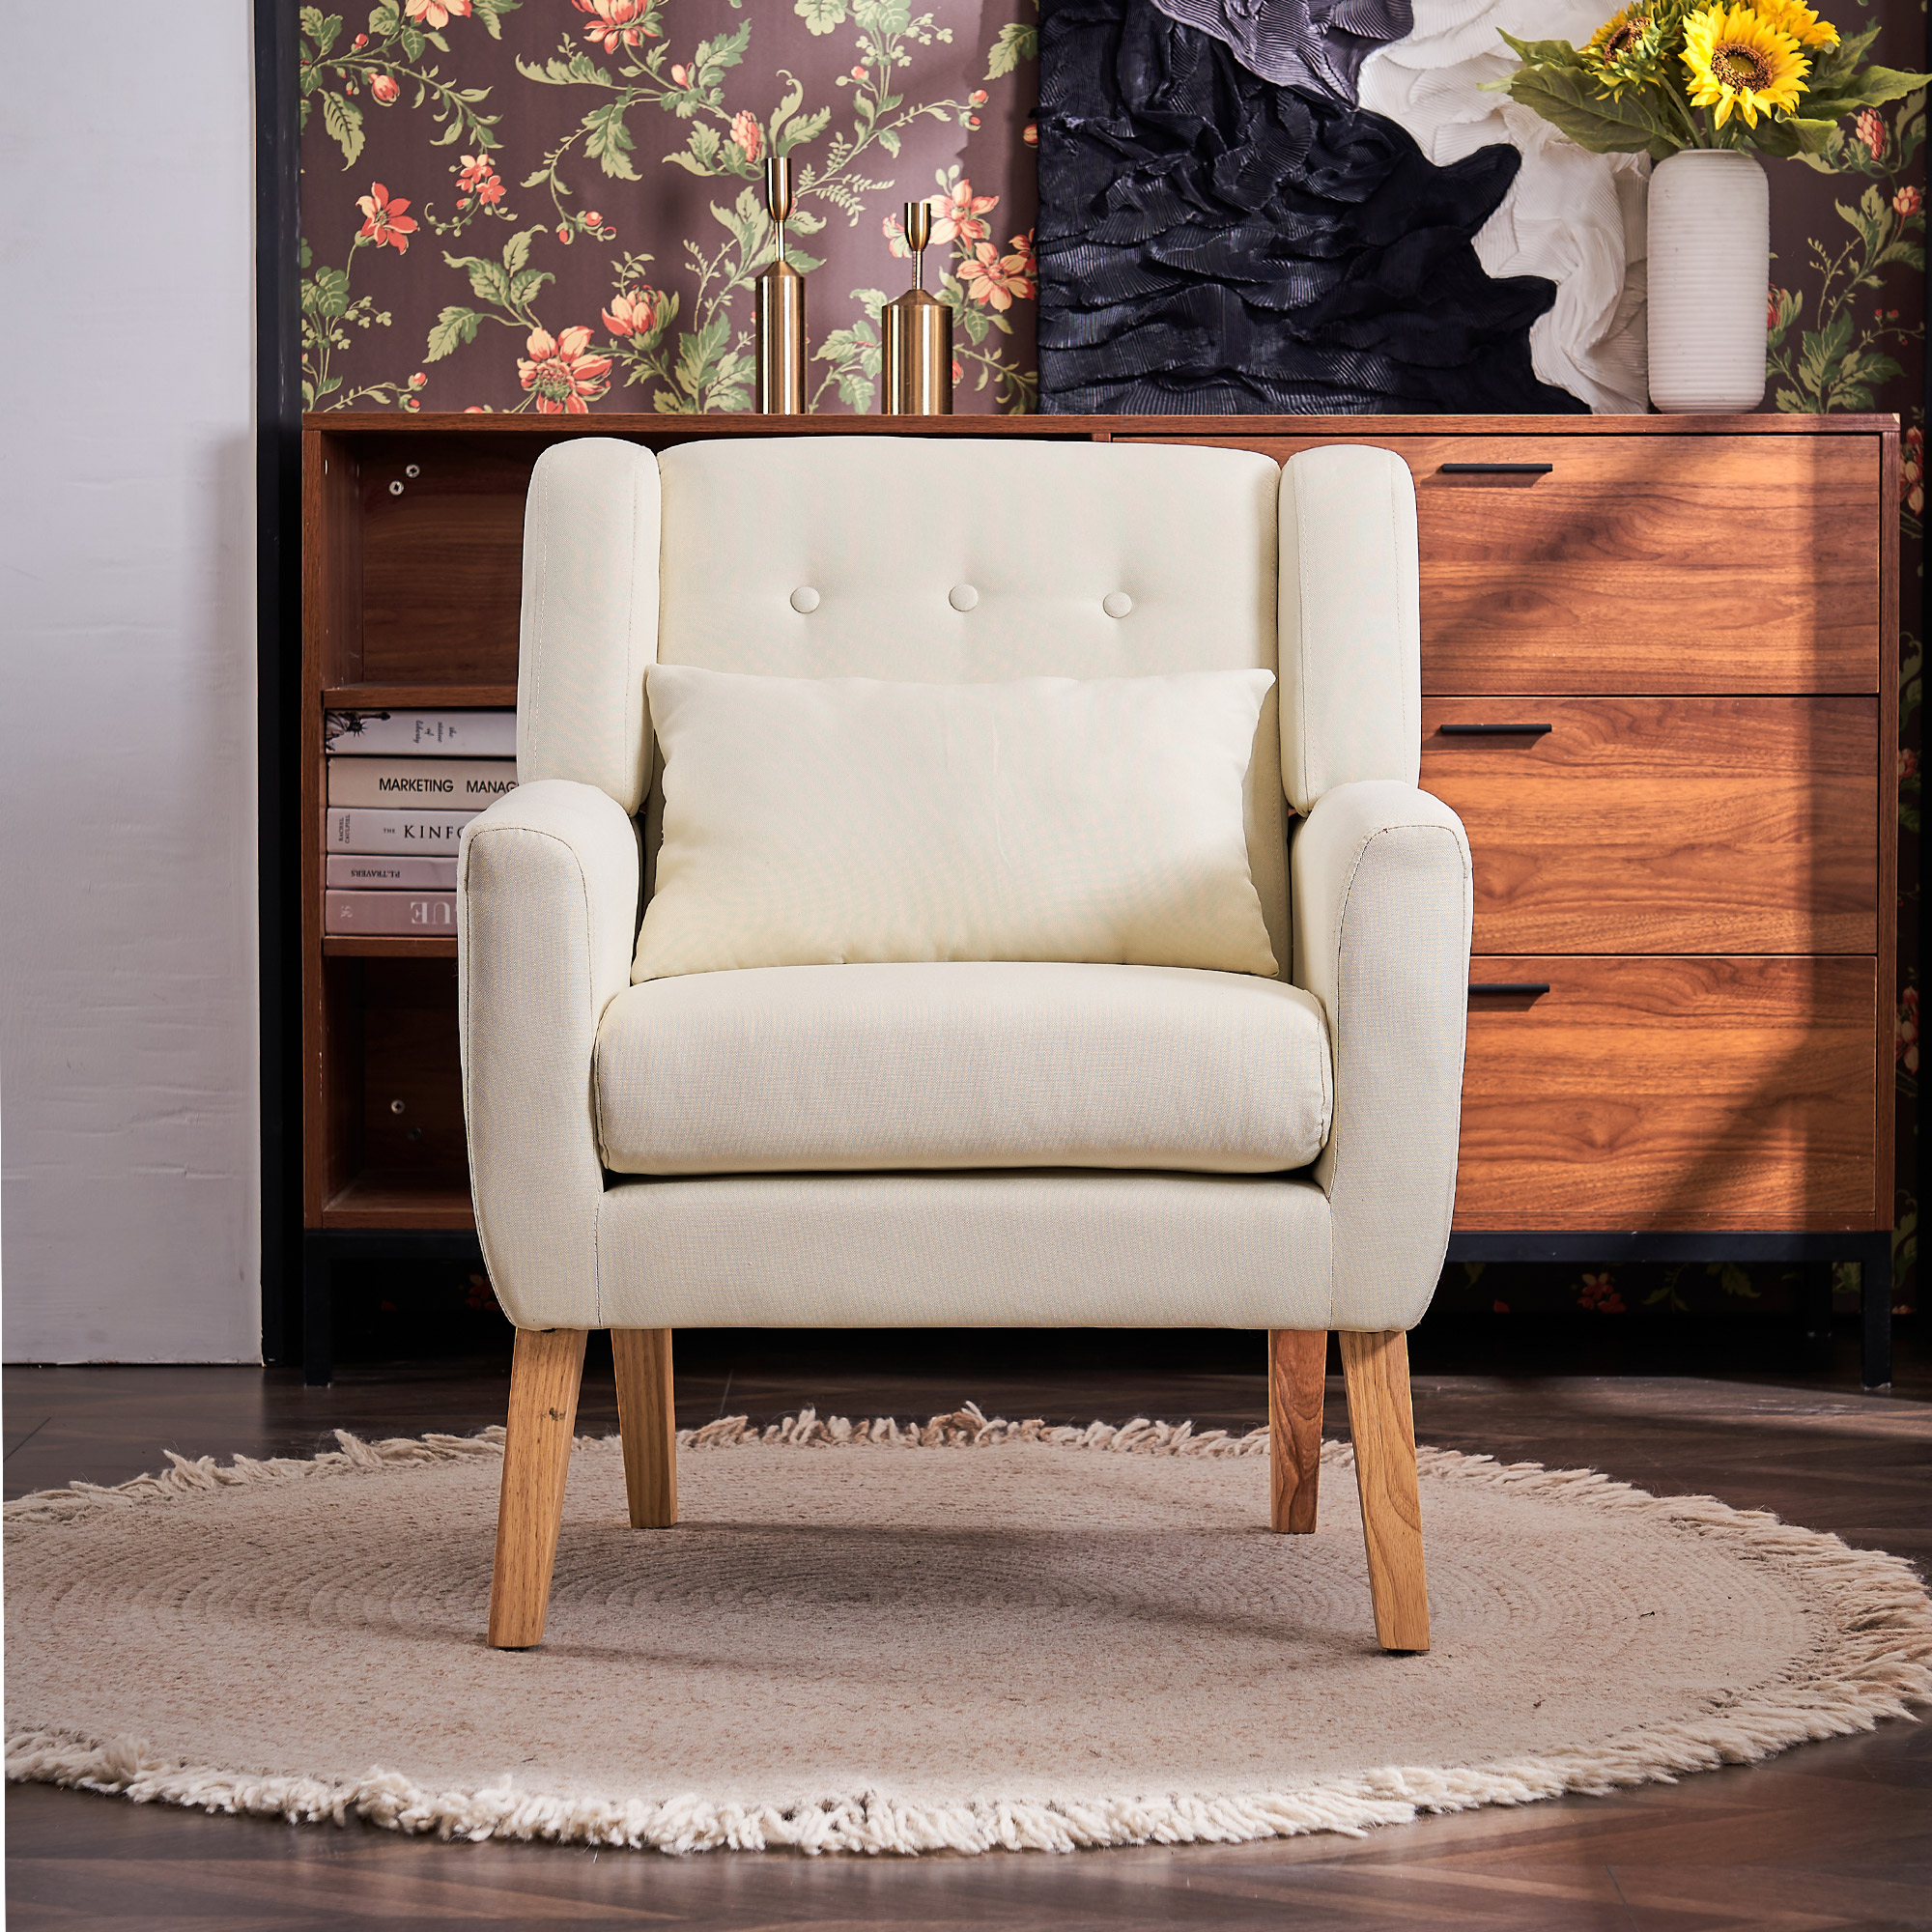 Solid Upholstered Accent Chair With Flared Armrests And Wooden Legs, Single Sofa Armchair - Light Gray